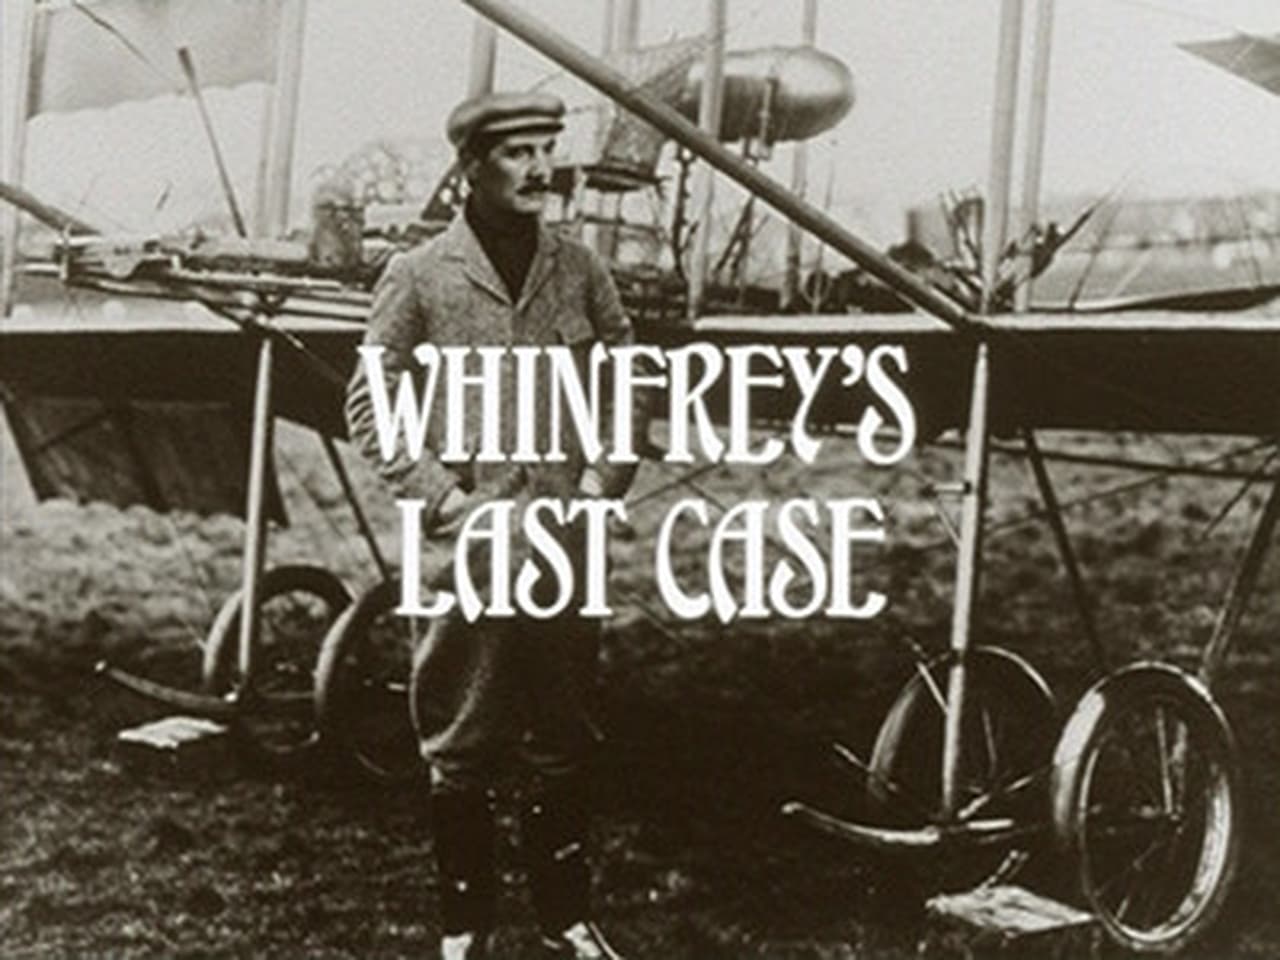 Whinfreys Last Case